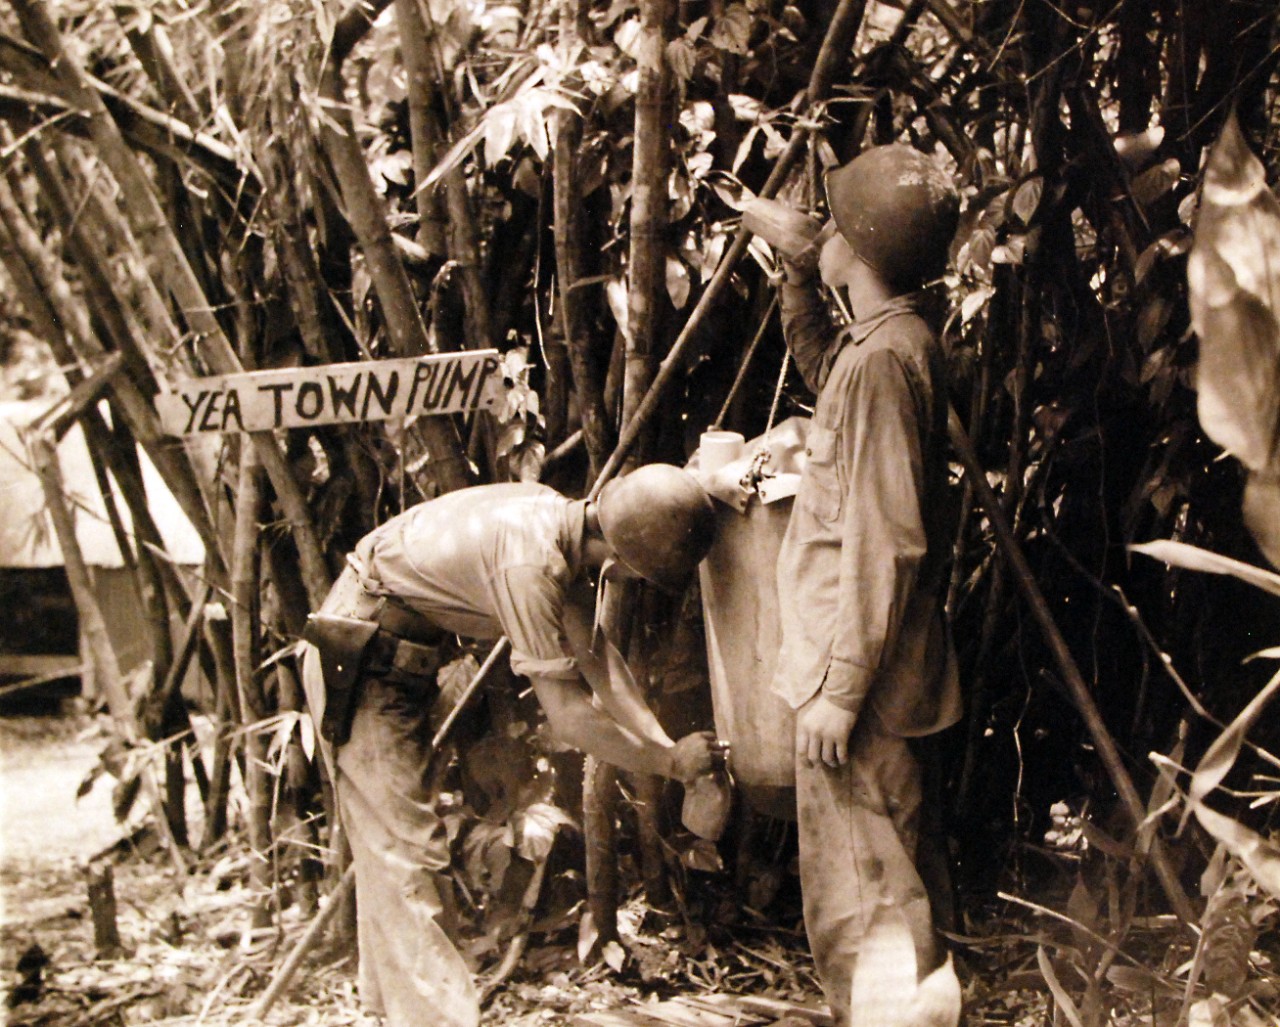 80-G-39213: Guadalcanal Campaign, August 1942-February 1943.  U.S. Marines get a drink from the lister bag, Marine Camp, Guadalcanal, January 30, 1943.  Note sign that reads, “Yea Town Pump.”  Official U.S. Navy photograph, now in the collections of the National Archives.  (2016/12/06).